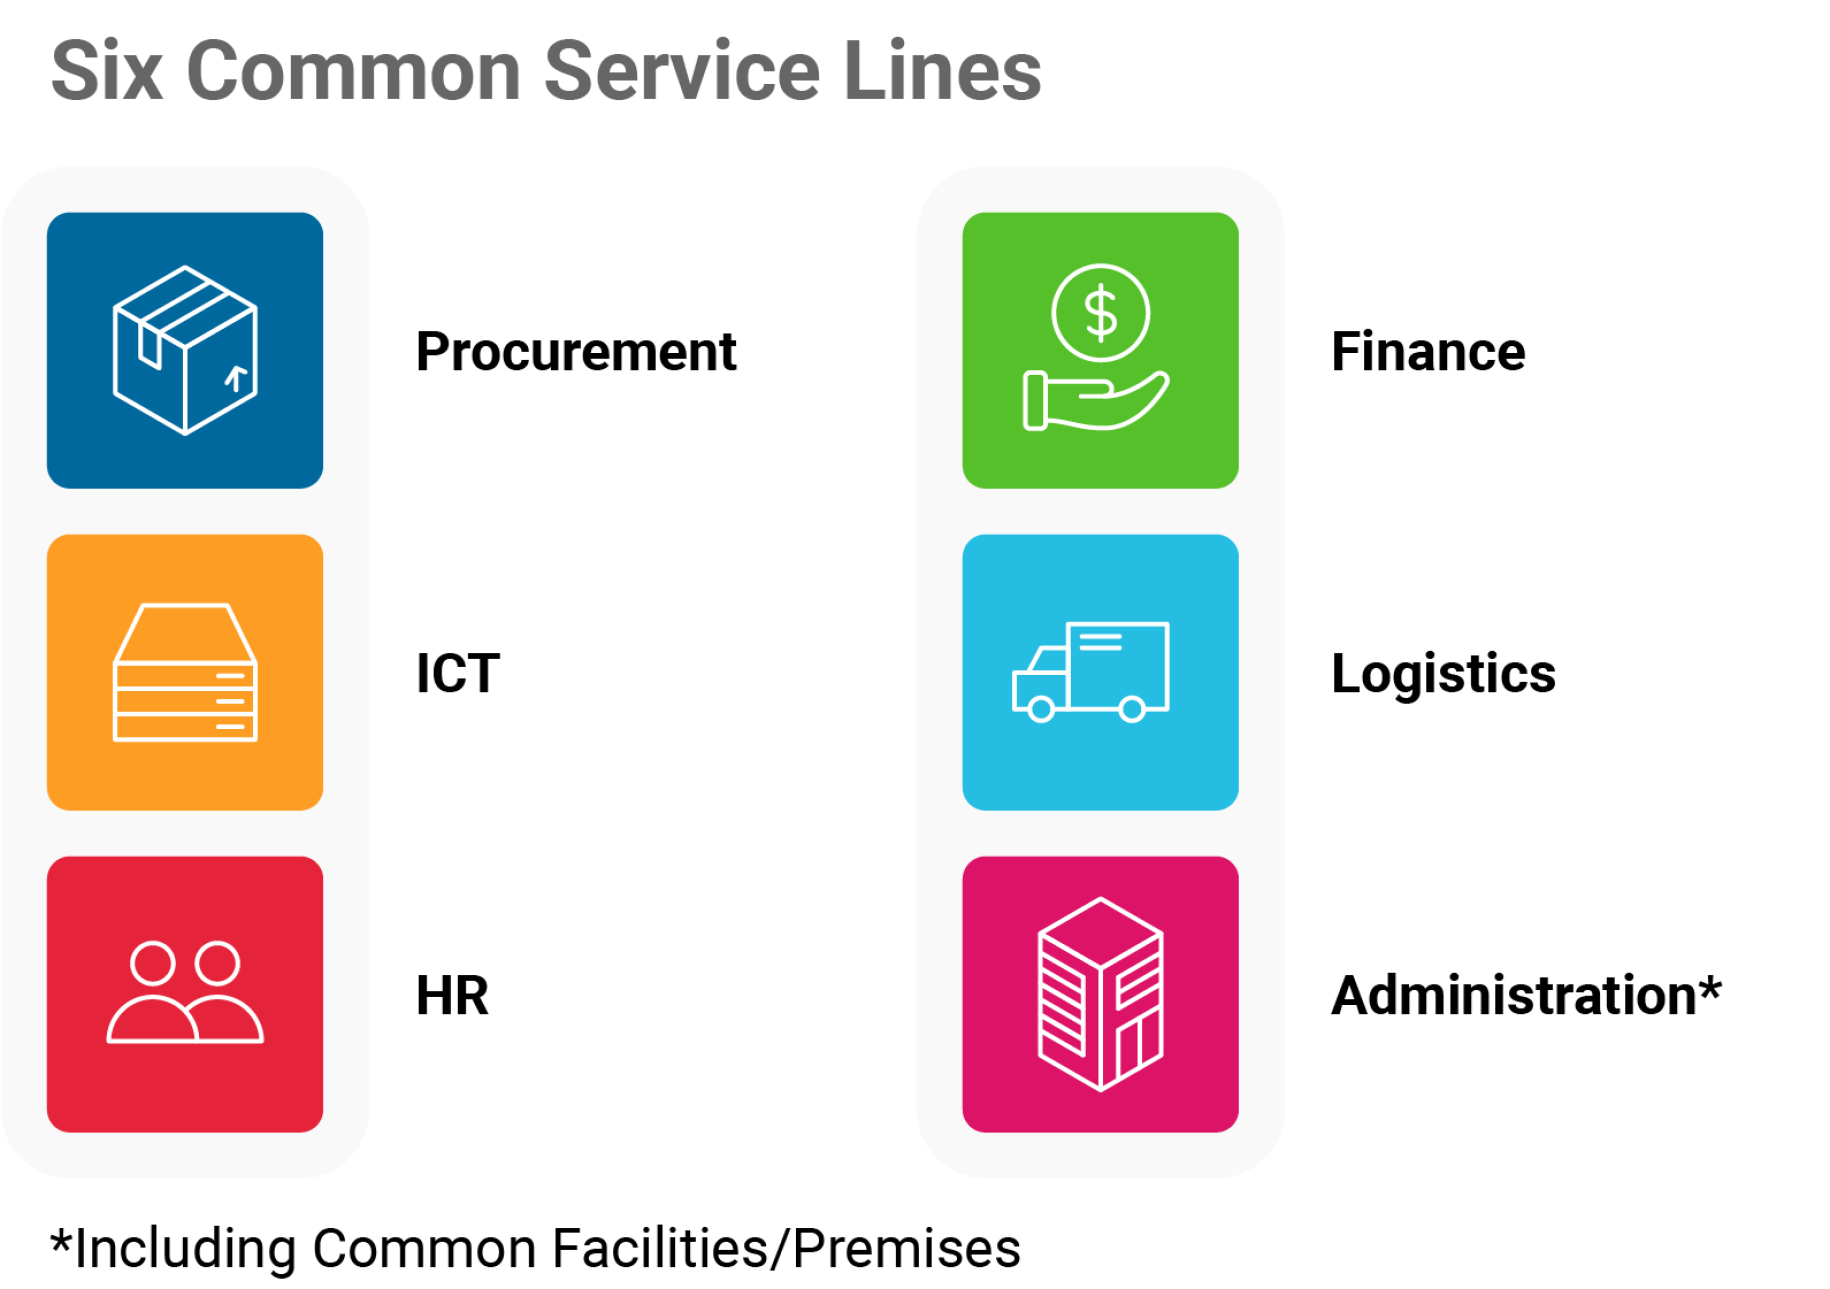 Graphic shows icon that represent the six common service lines: Procurement, ICT, HR, Finance, Logistics and Administration. 